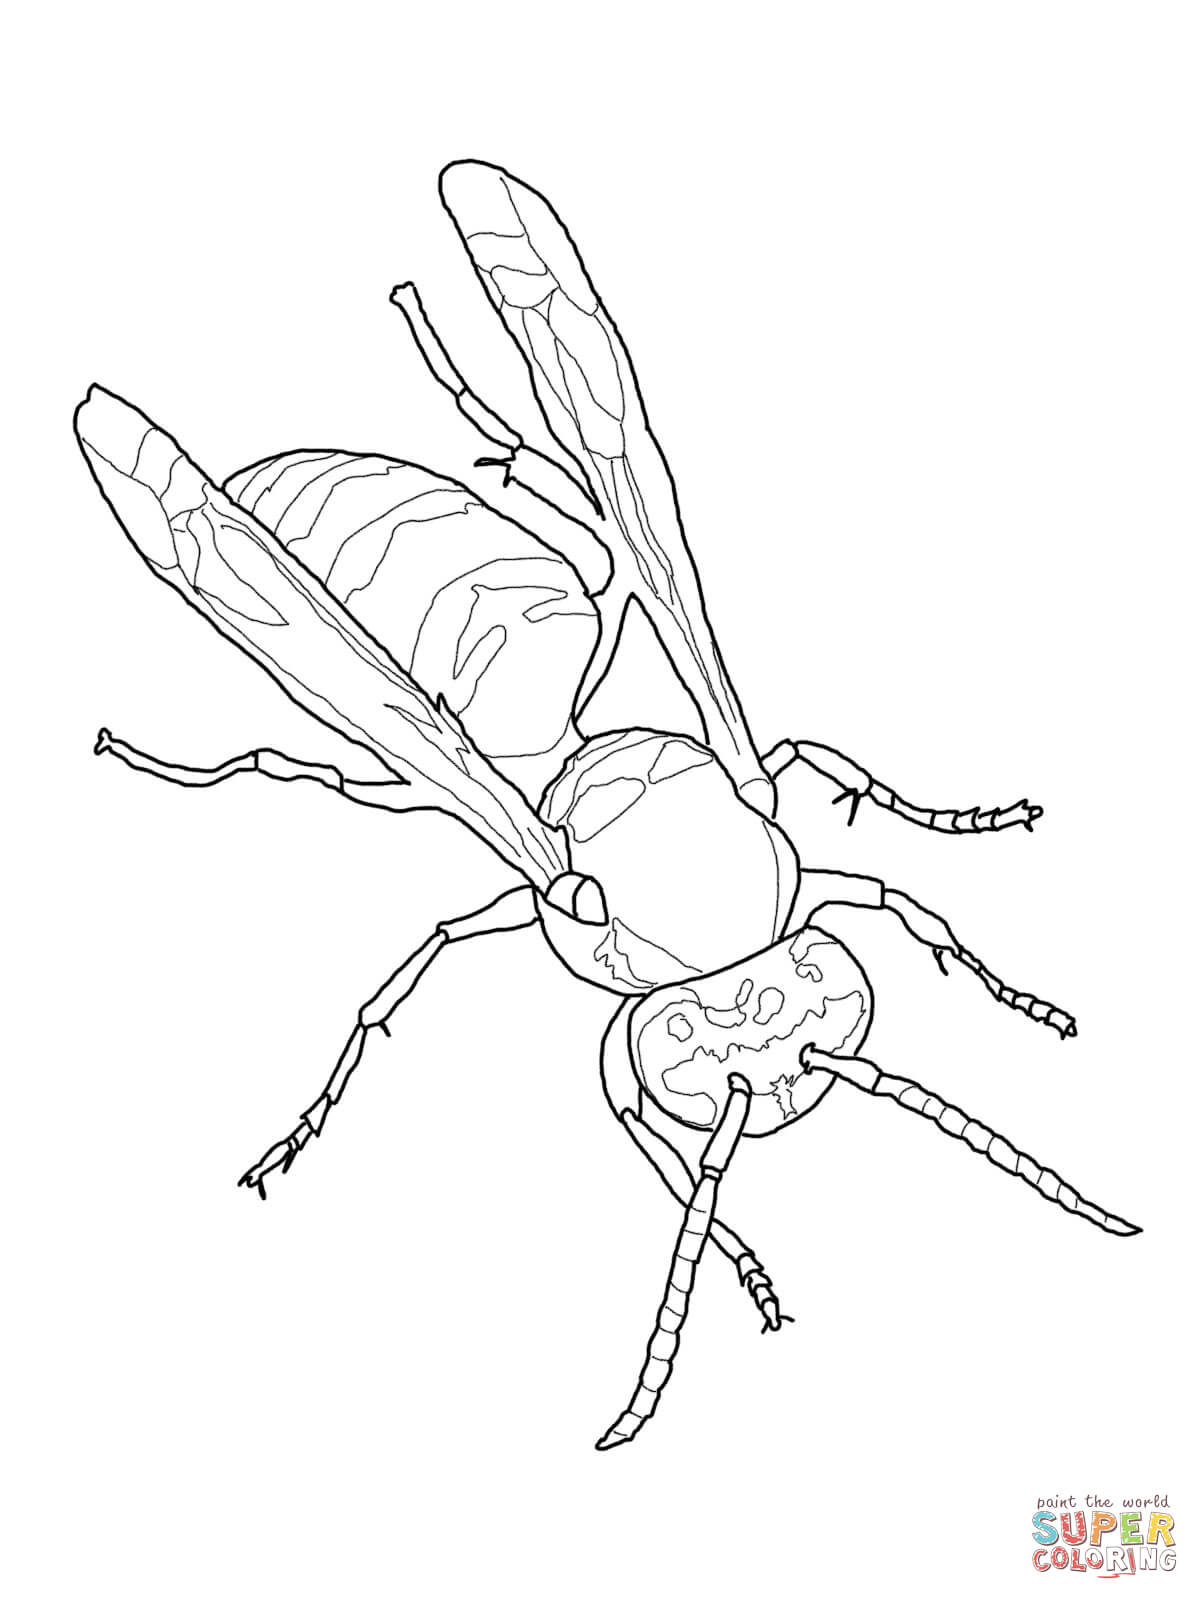 Eastern yellow jacket coloring page free printable coloring pages